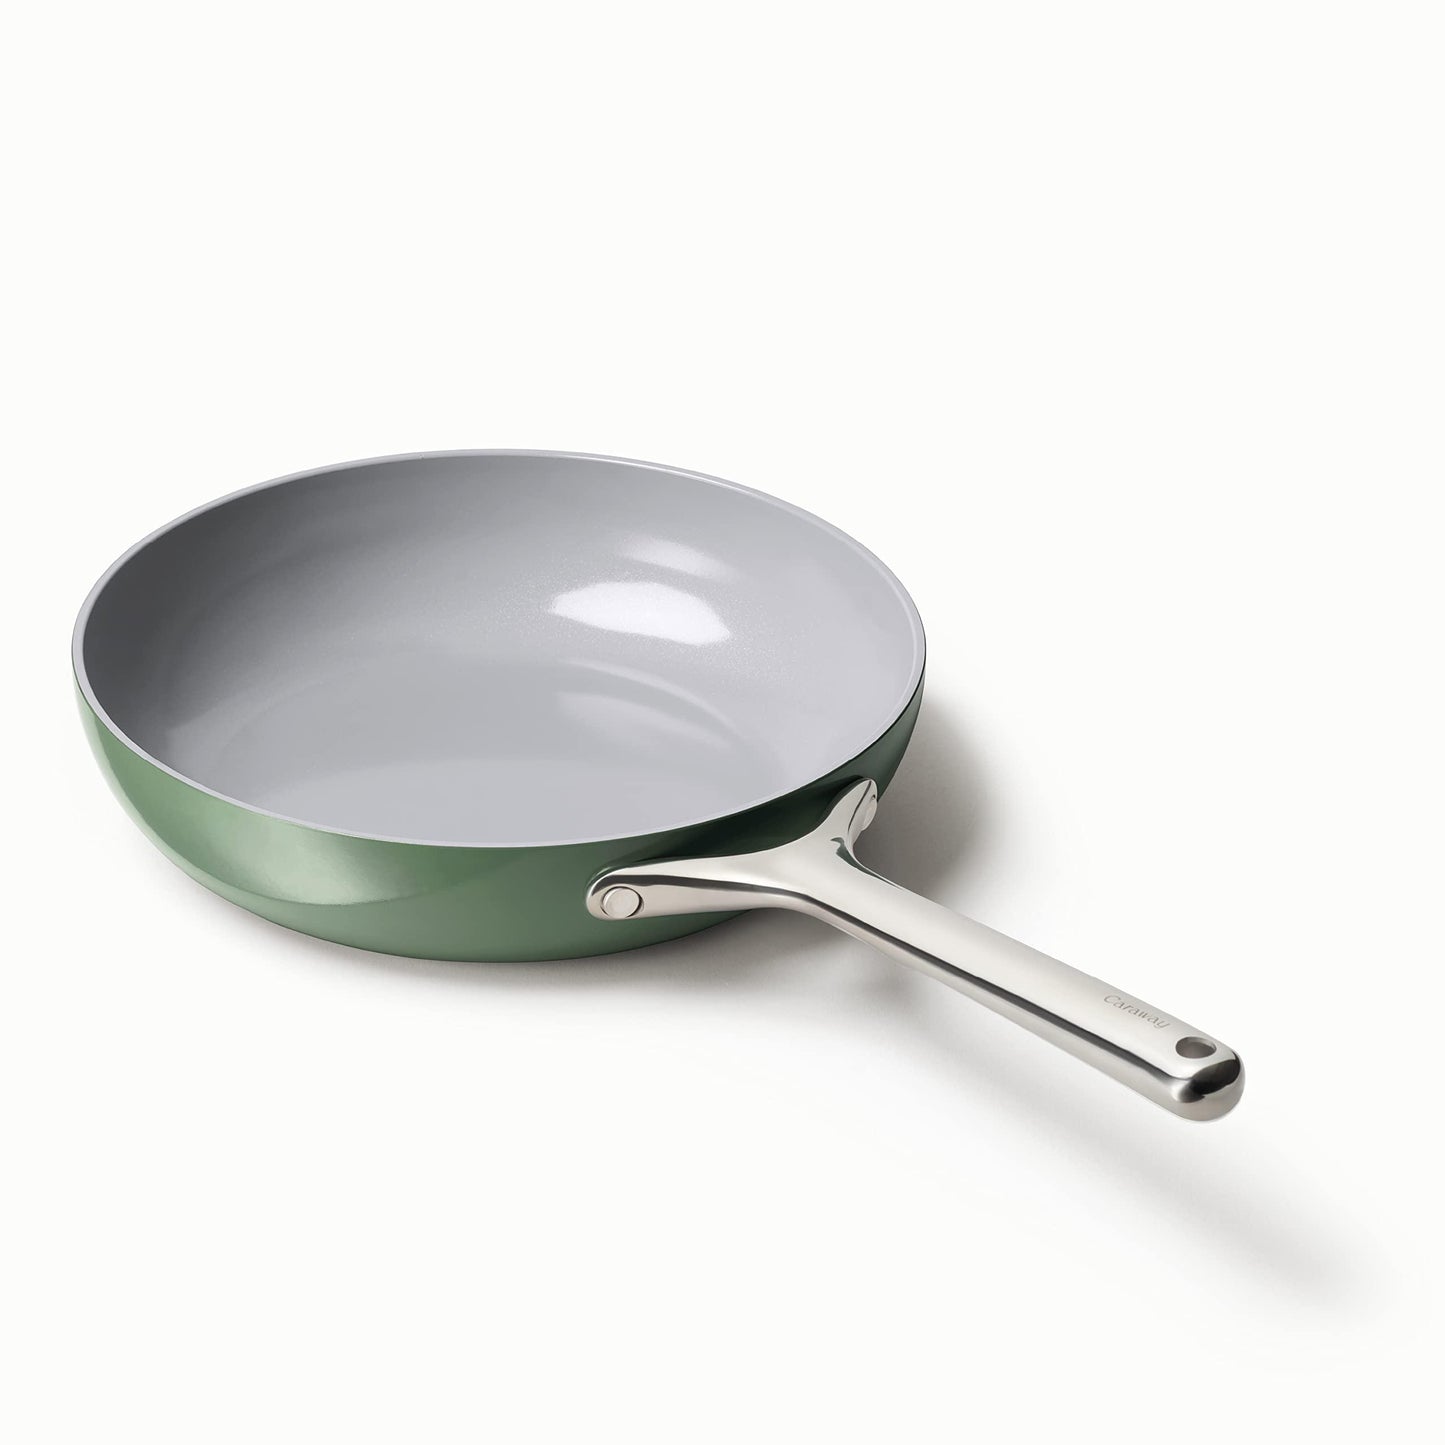 Caraway Nonstick Ceramic Frying Pan (2.7 qt, 10.5") - Non Toxic, PTFE & PFOA Free - Oven Safe & Compatible with All Stovetops (Gas, Electric & Induction) - Sage - CookCave